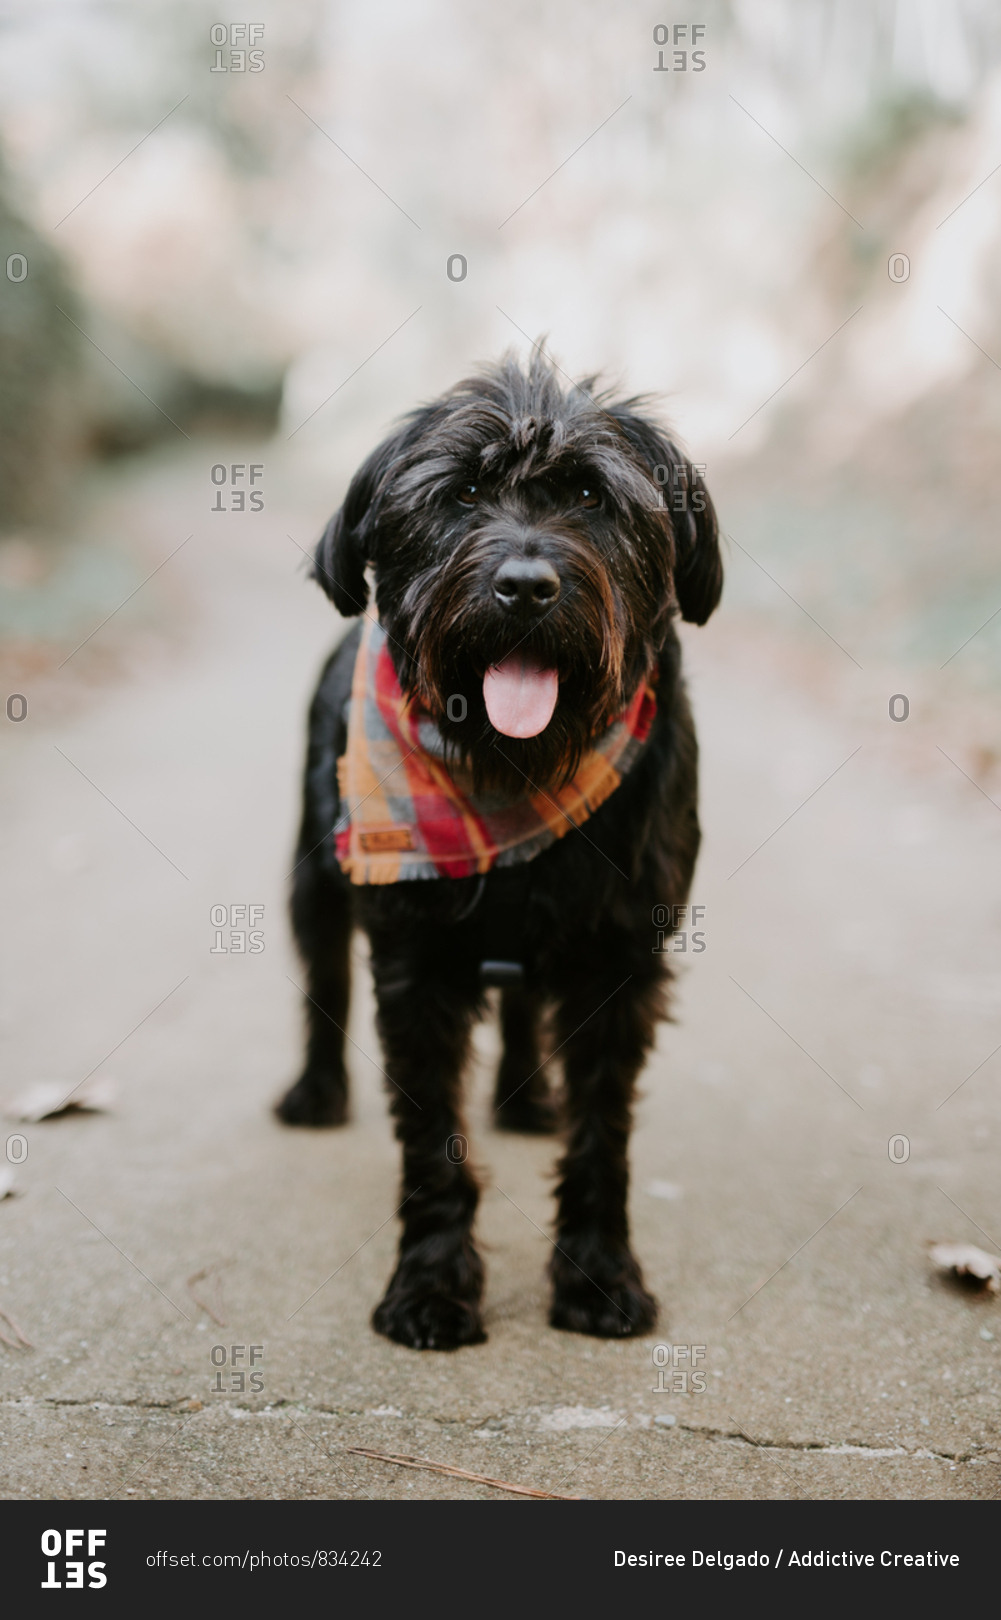 Hairy dog in red neckerchief standing with tongue out and resting in the middle of the road on daytime